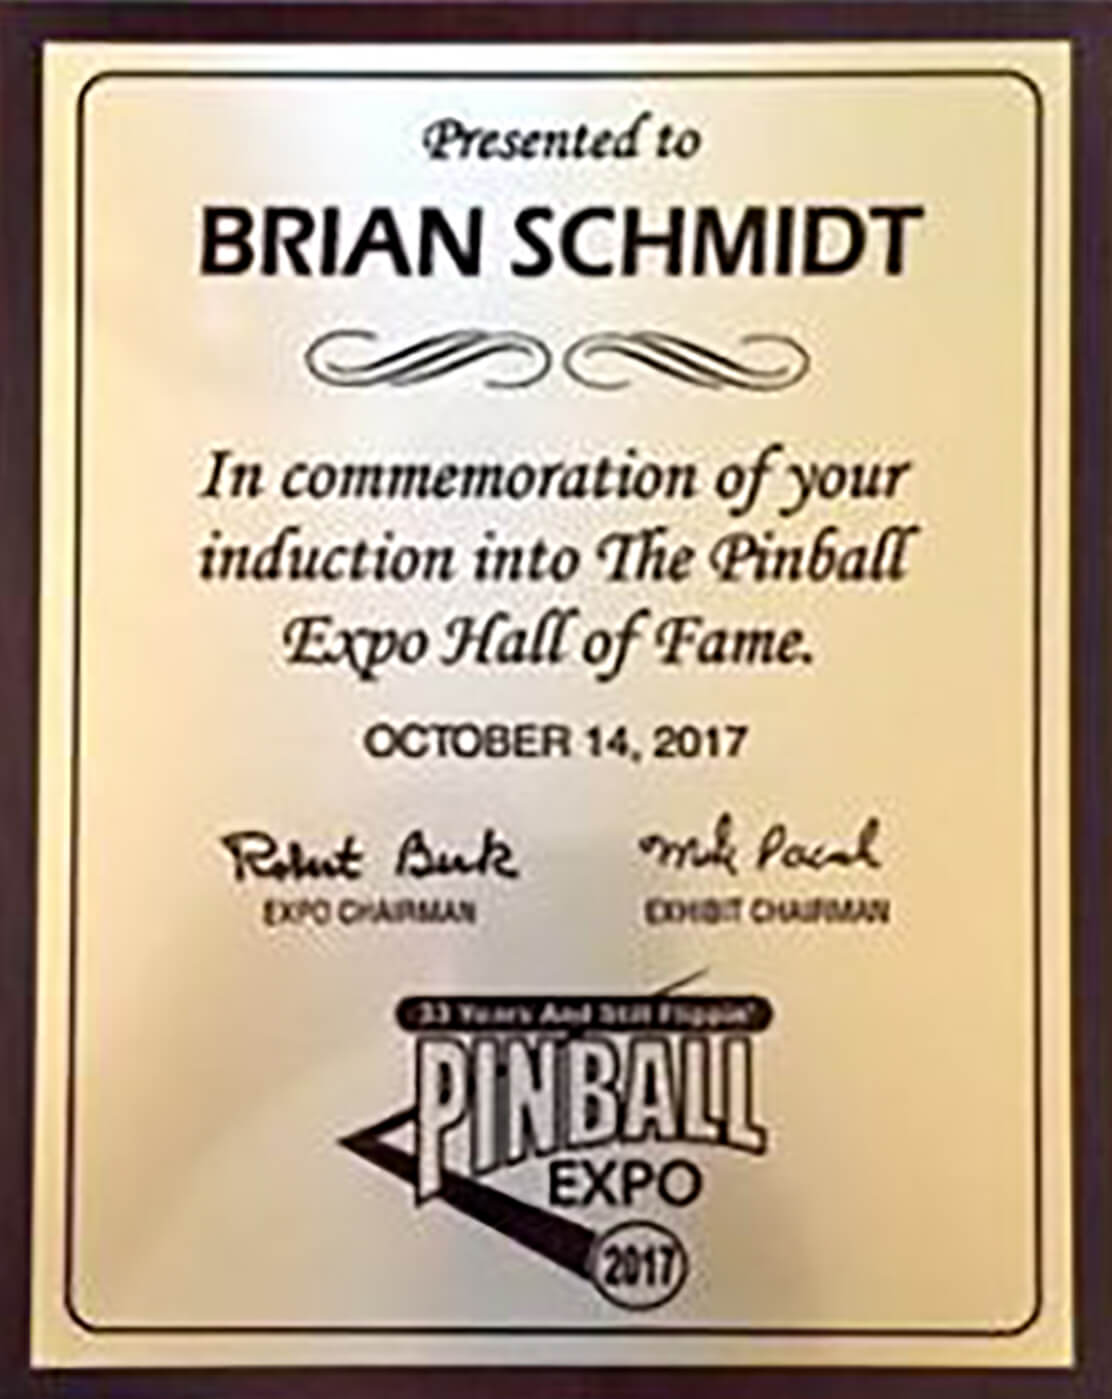 Picture of the plaque awarded to Brian Schmidt upon his induction into the Pinball Expo Hall of Fame